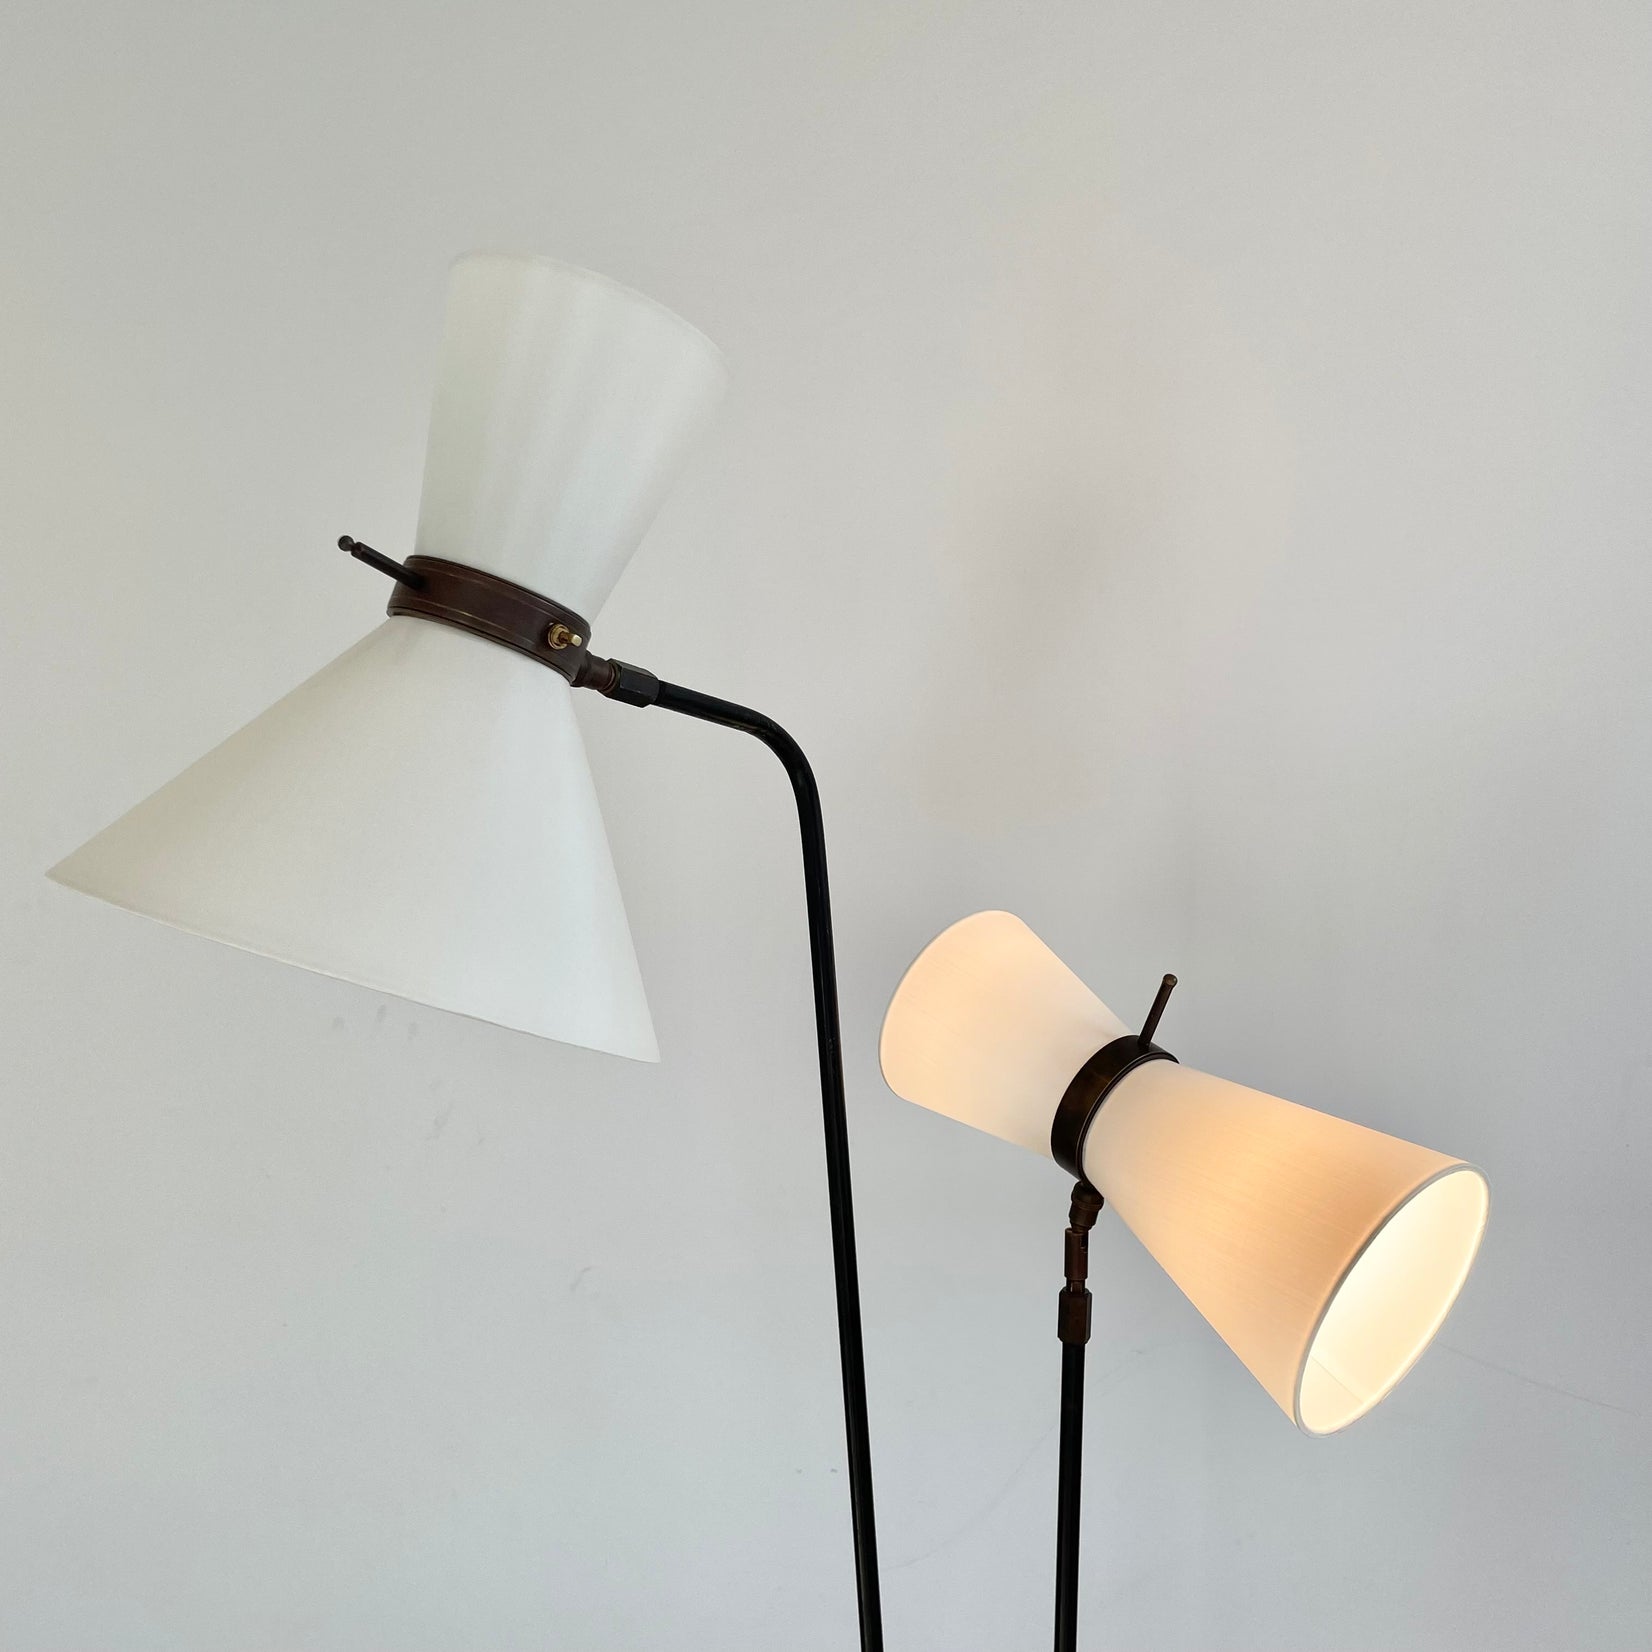 Double Headed Articulating Floor Lamp, 1950s France